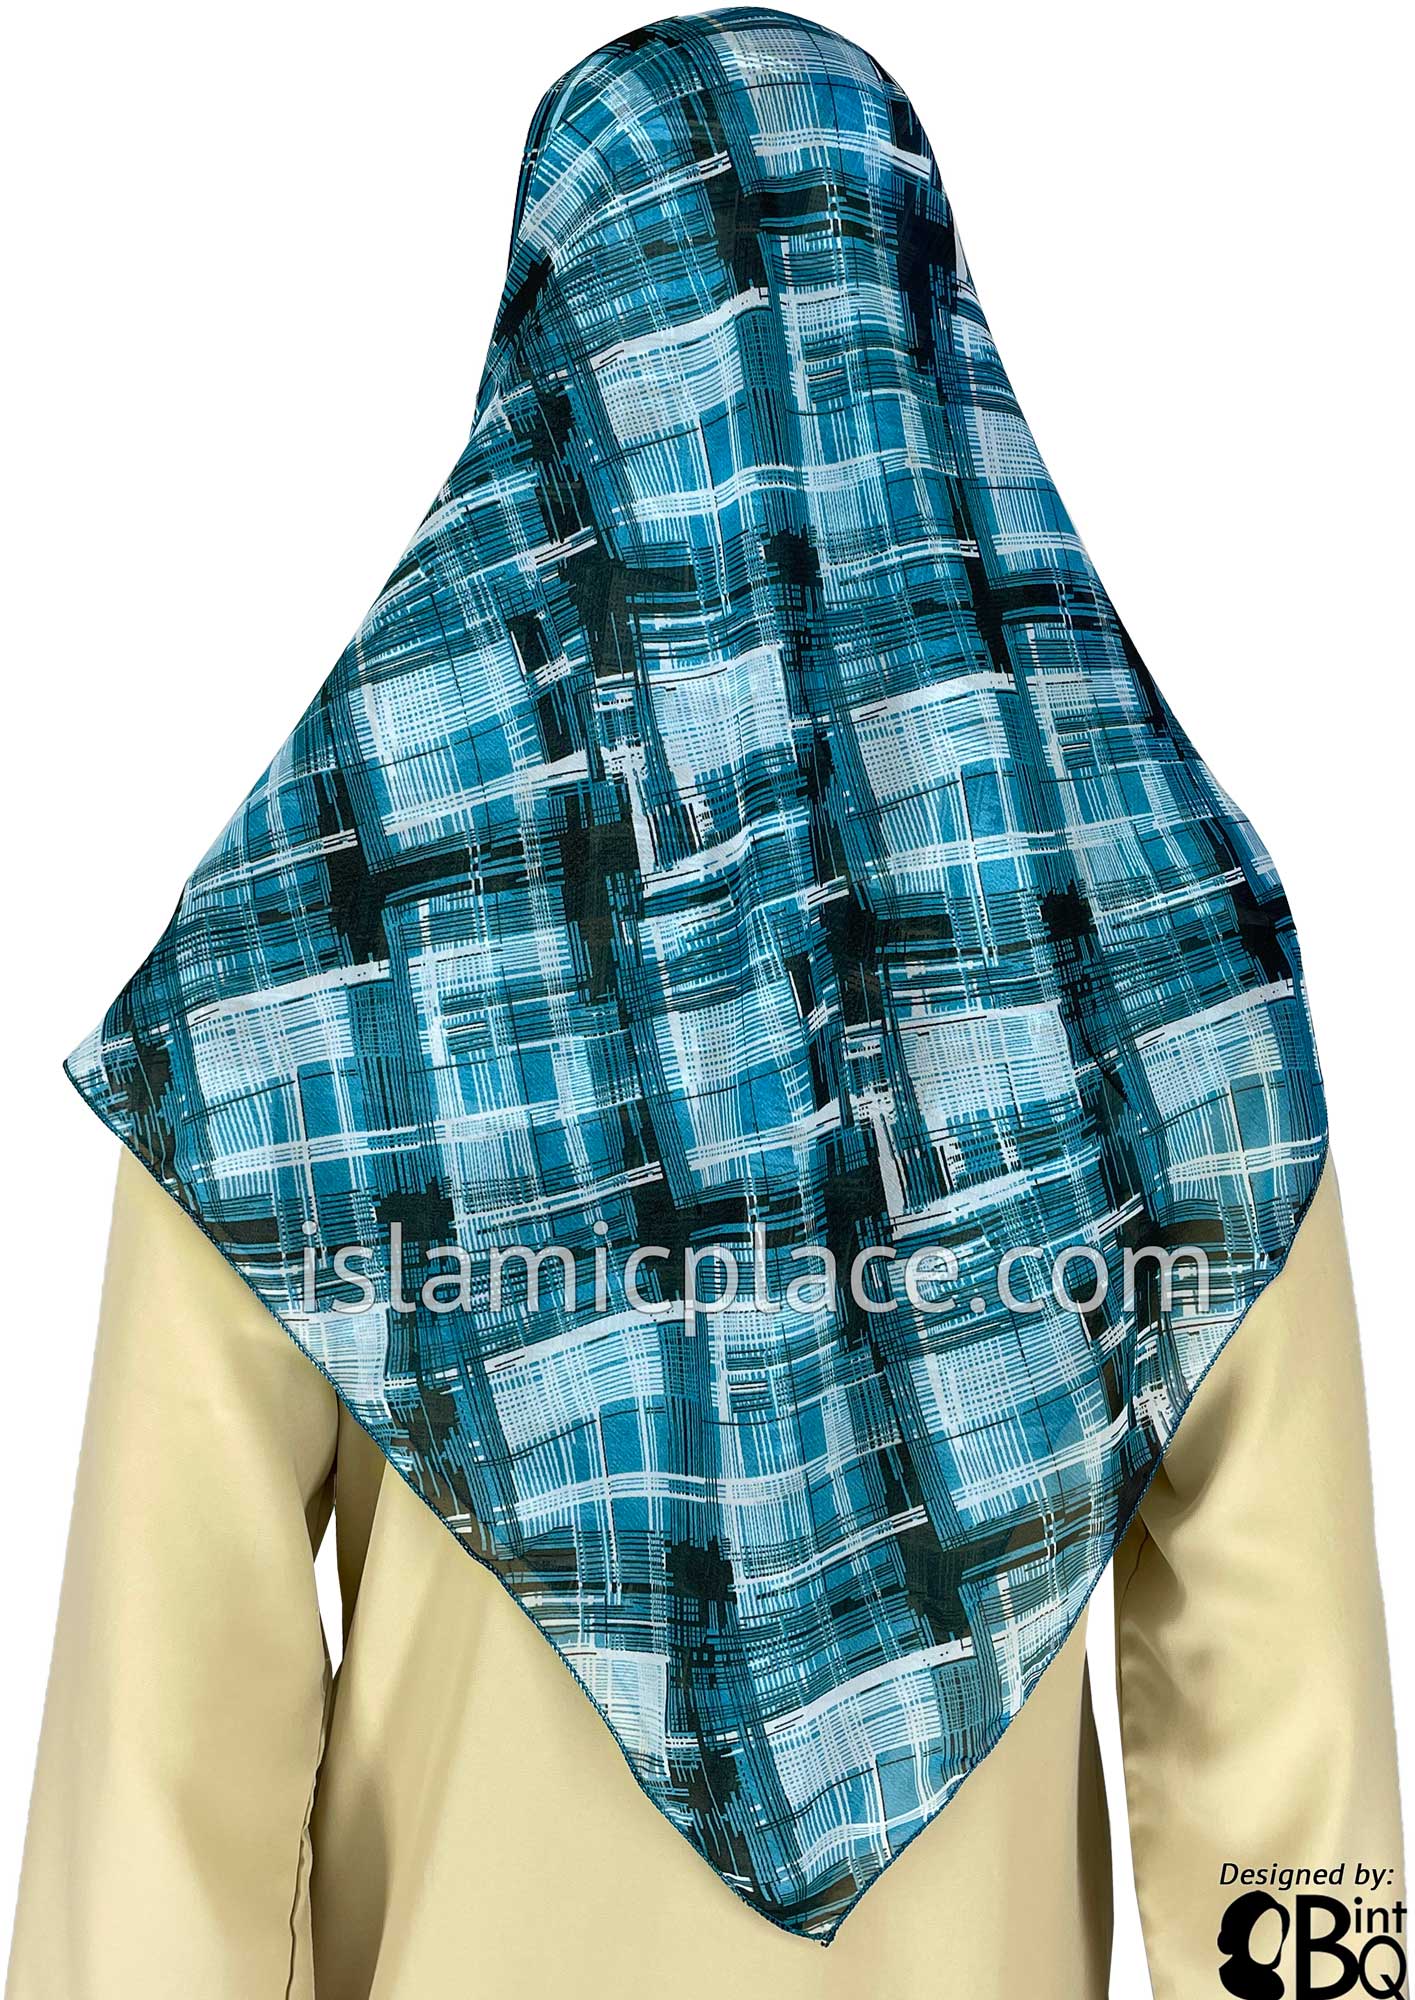 White and Black lines on Teal Blue - 45" Square Printed Khimar